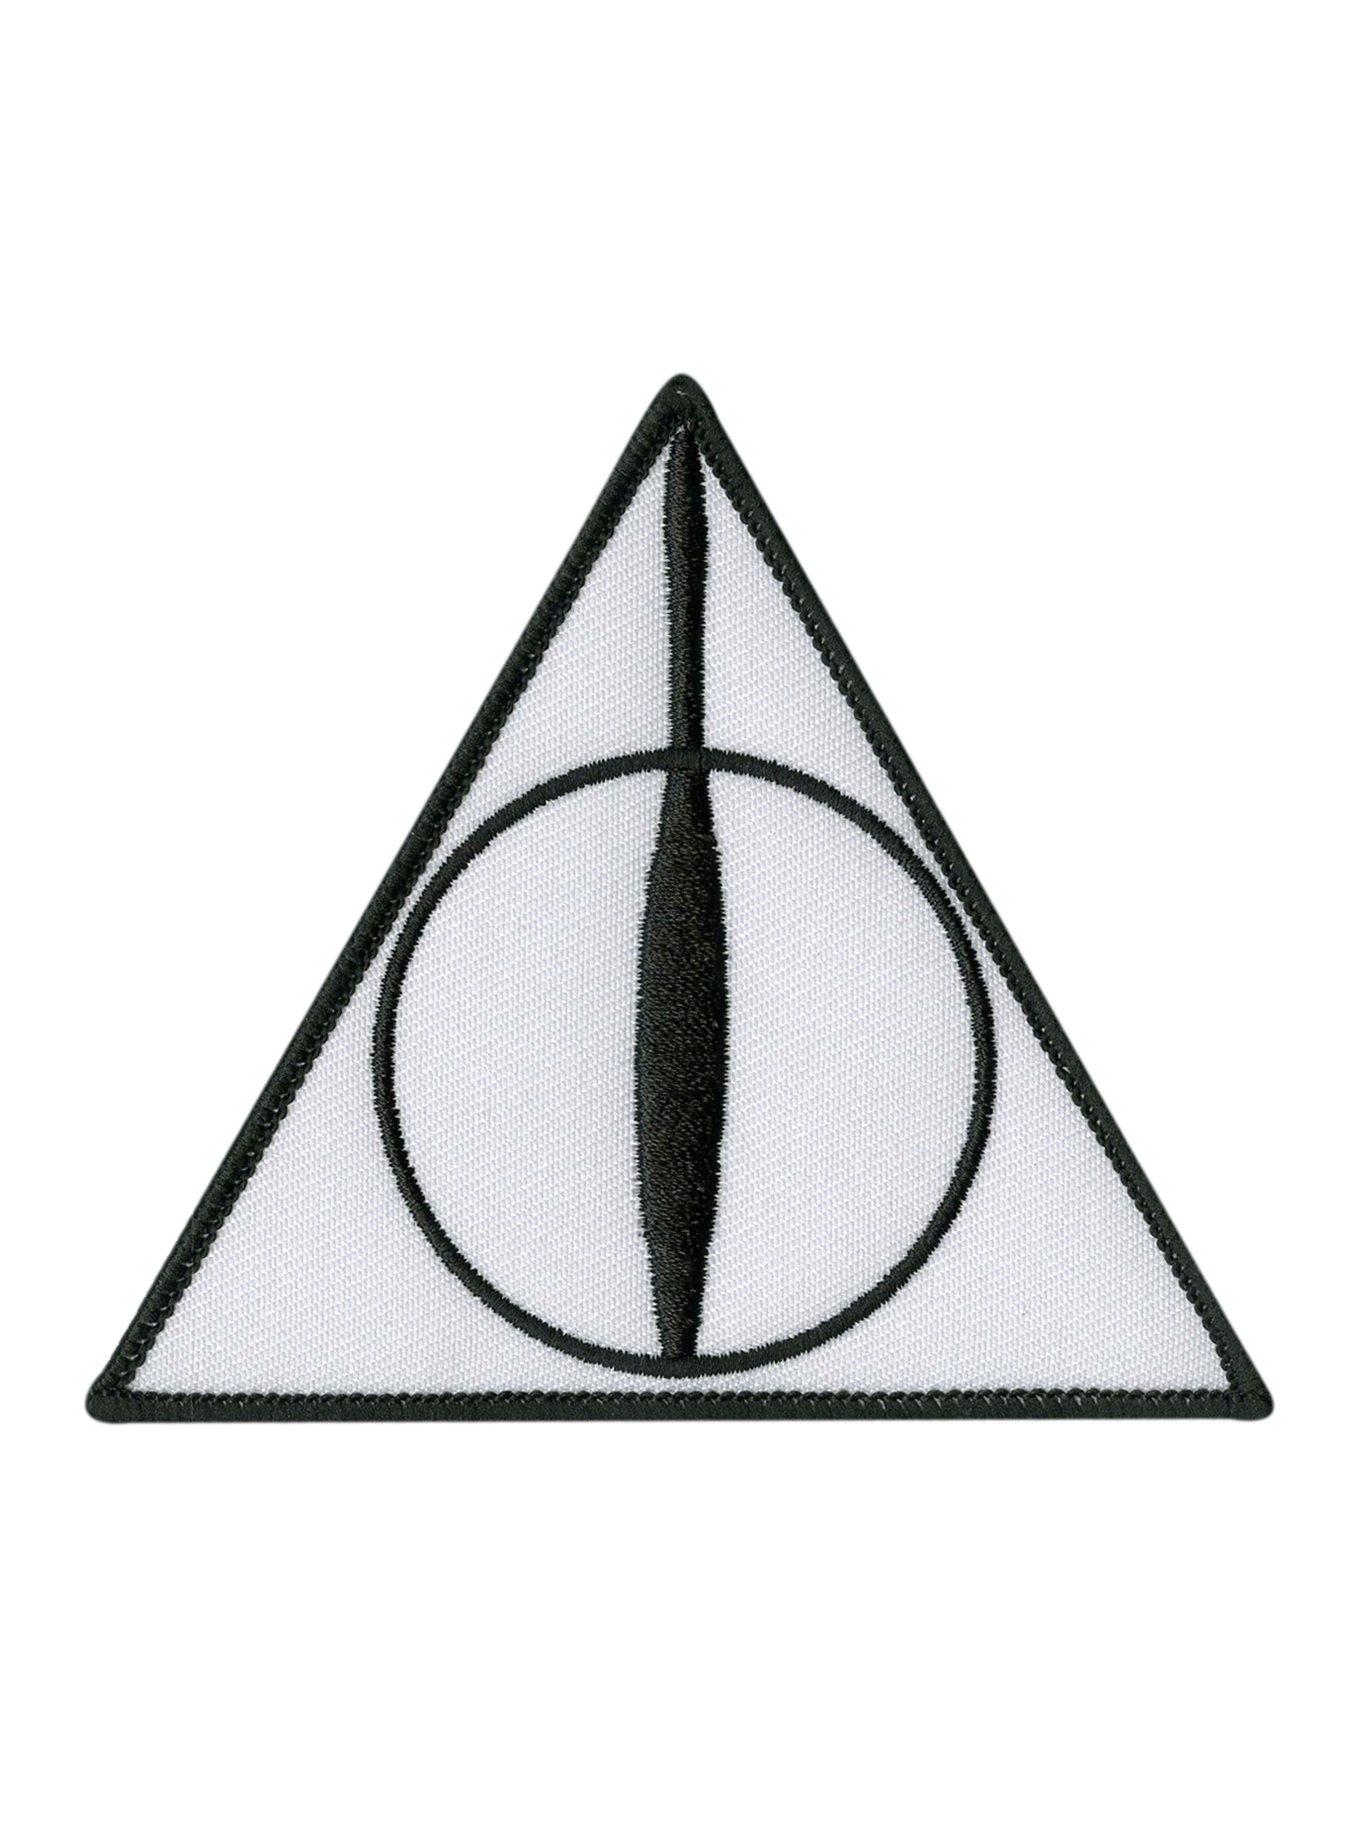 Punk Patches - Dark Mark Symbol - Harry Potter Patch - Sew On